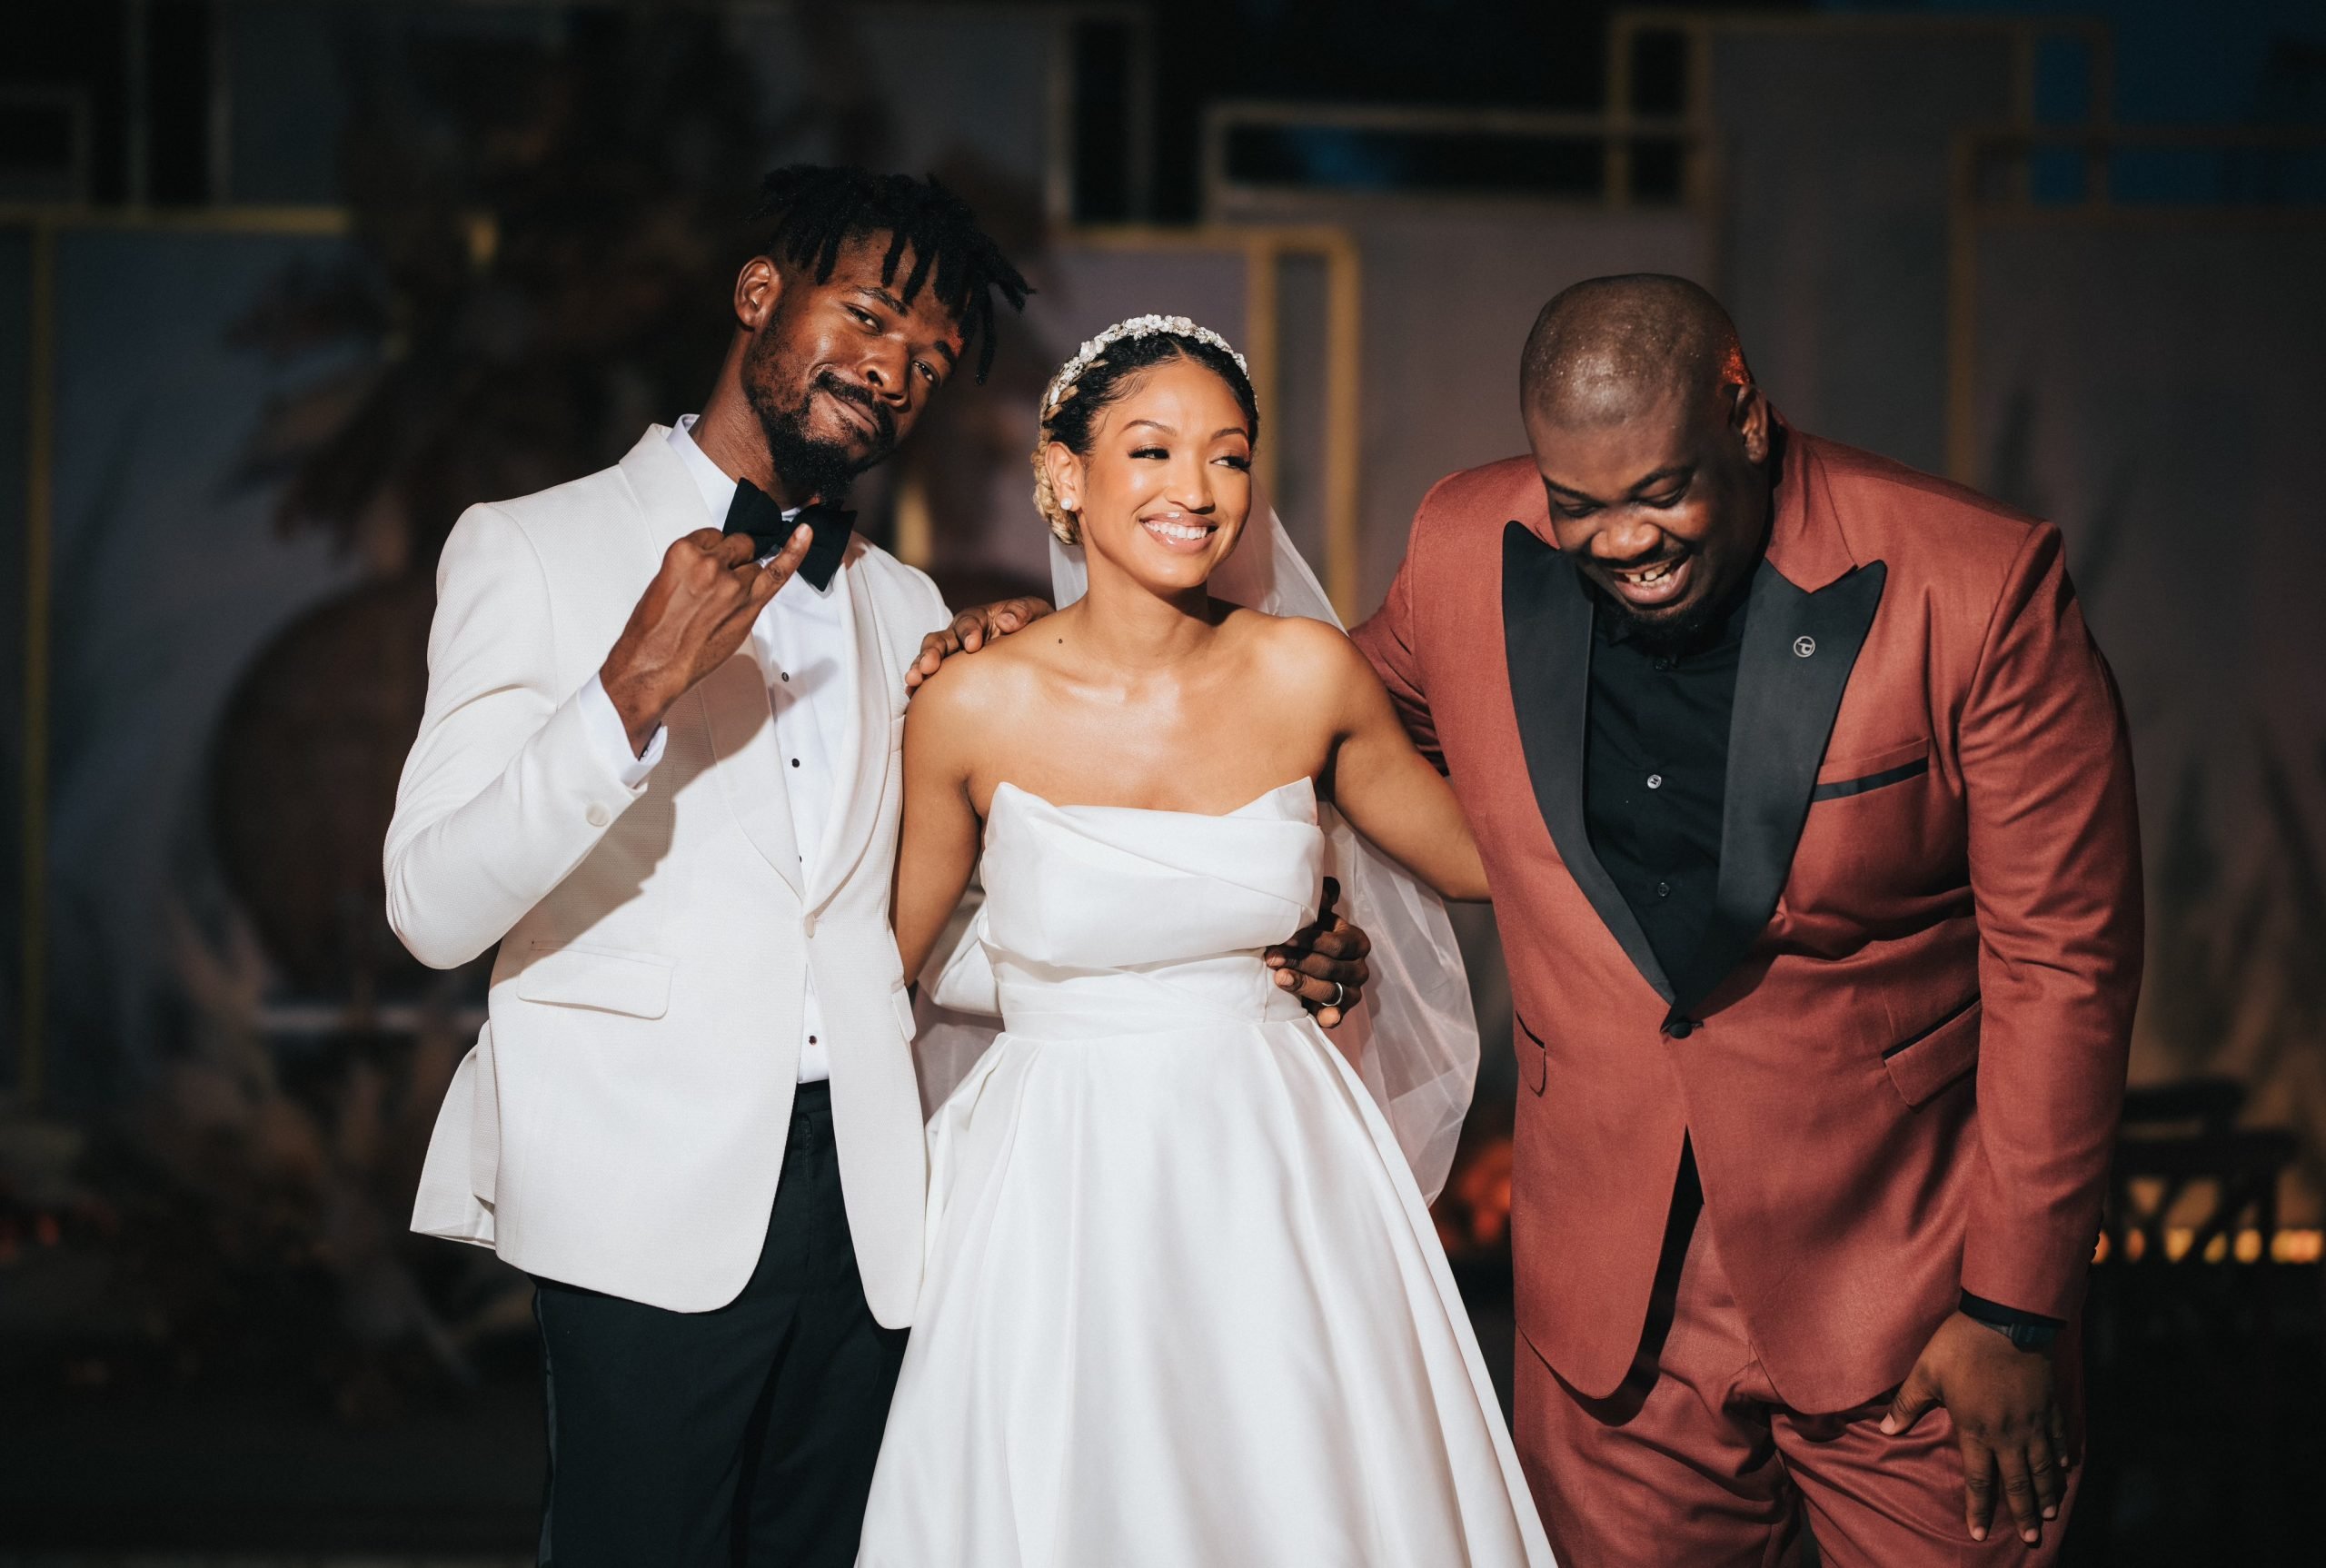 Johnny Drille's wedding pictures surfaces online